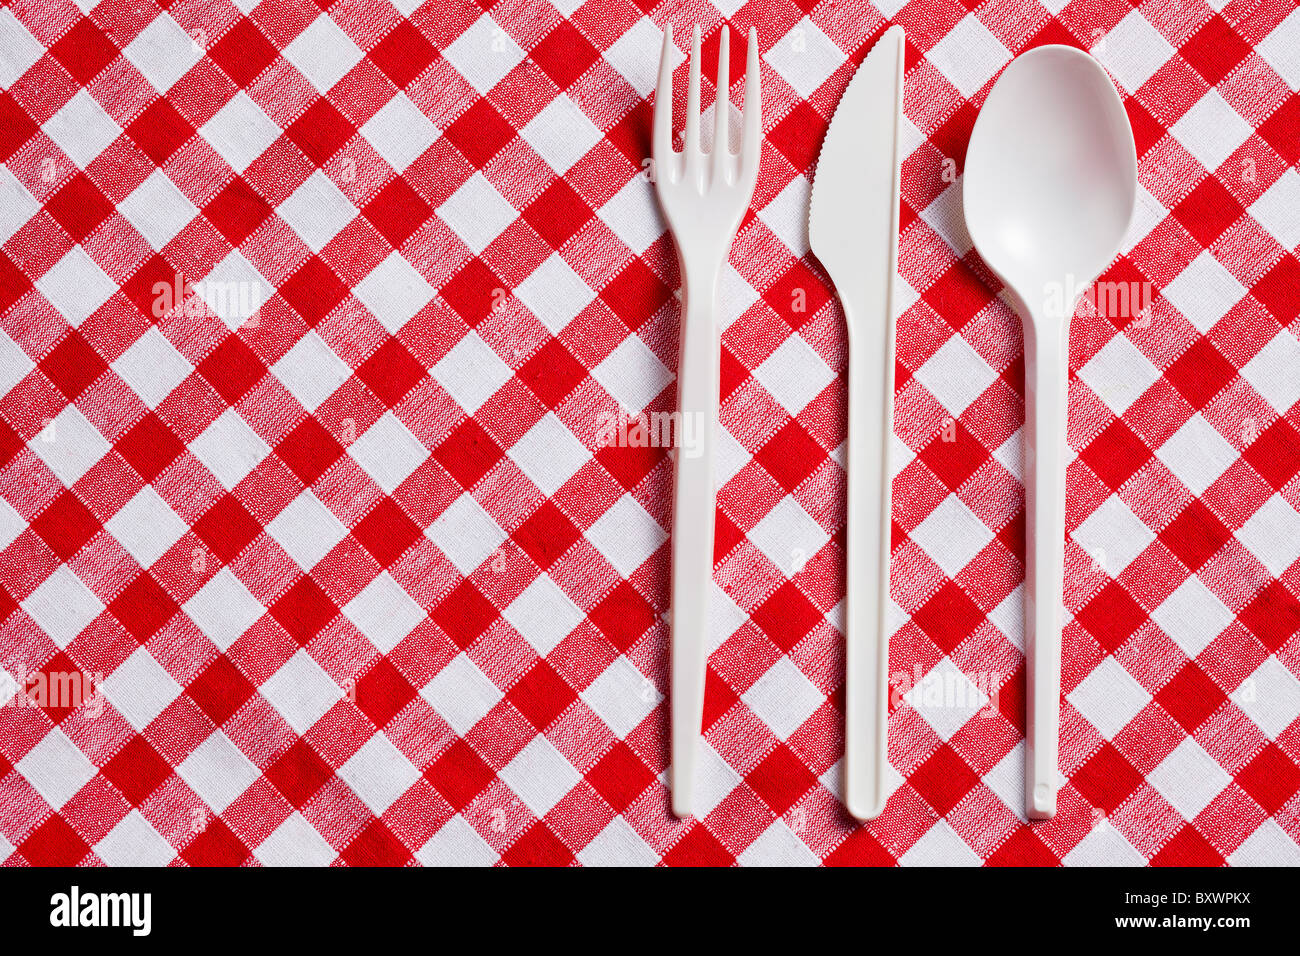 the plastic cutlery on checkered tablecloth Stock Photo